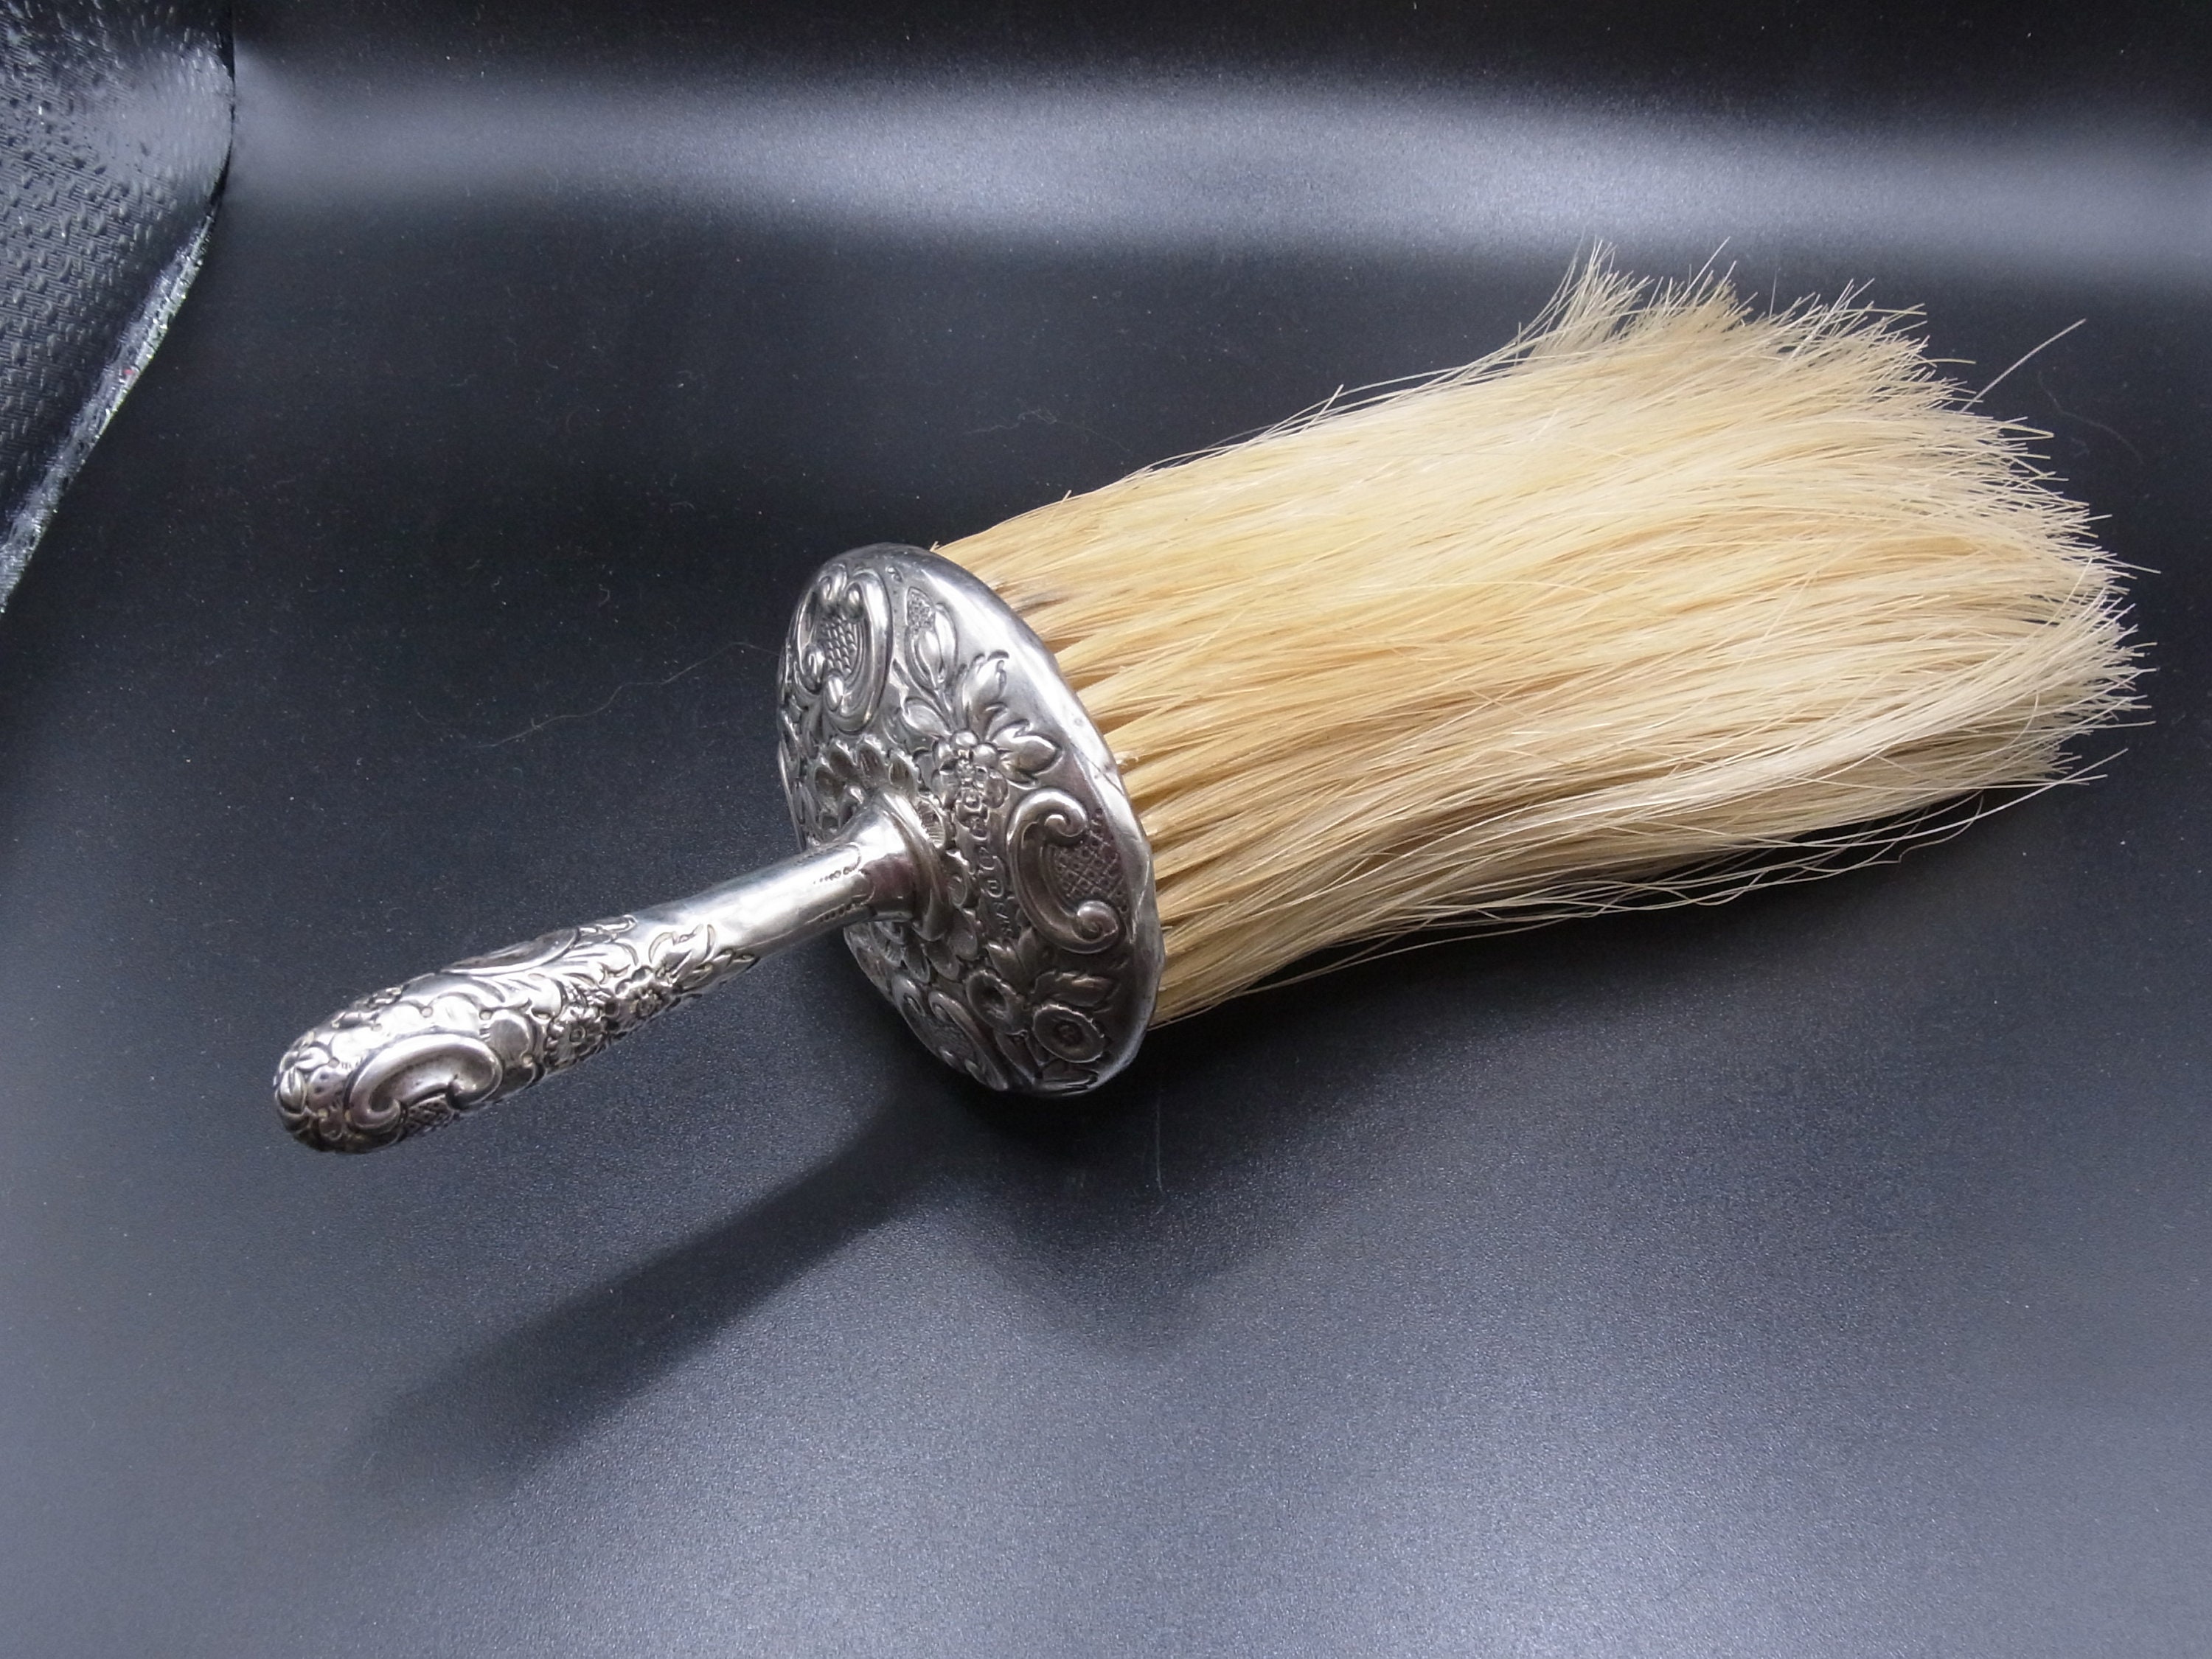 Ornate Antique Silver Plate Handle Clothing Hat Crumb Brush